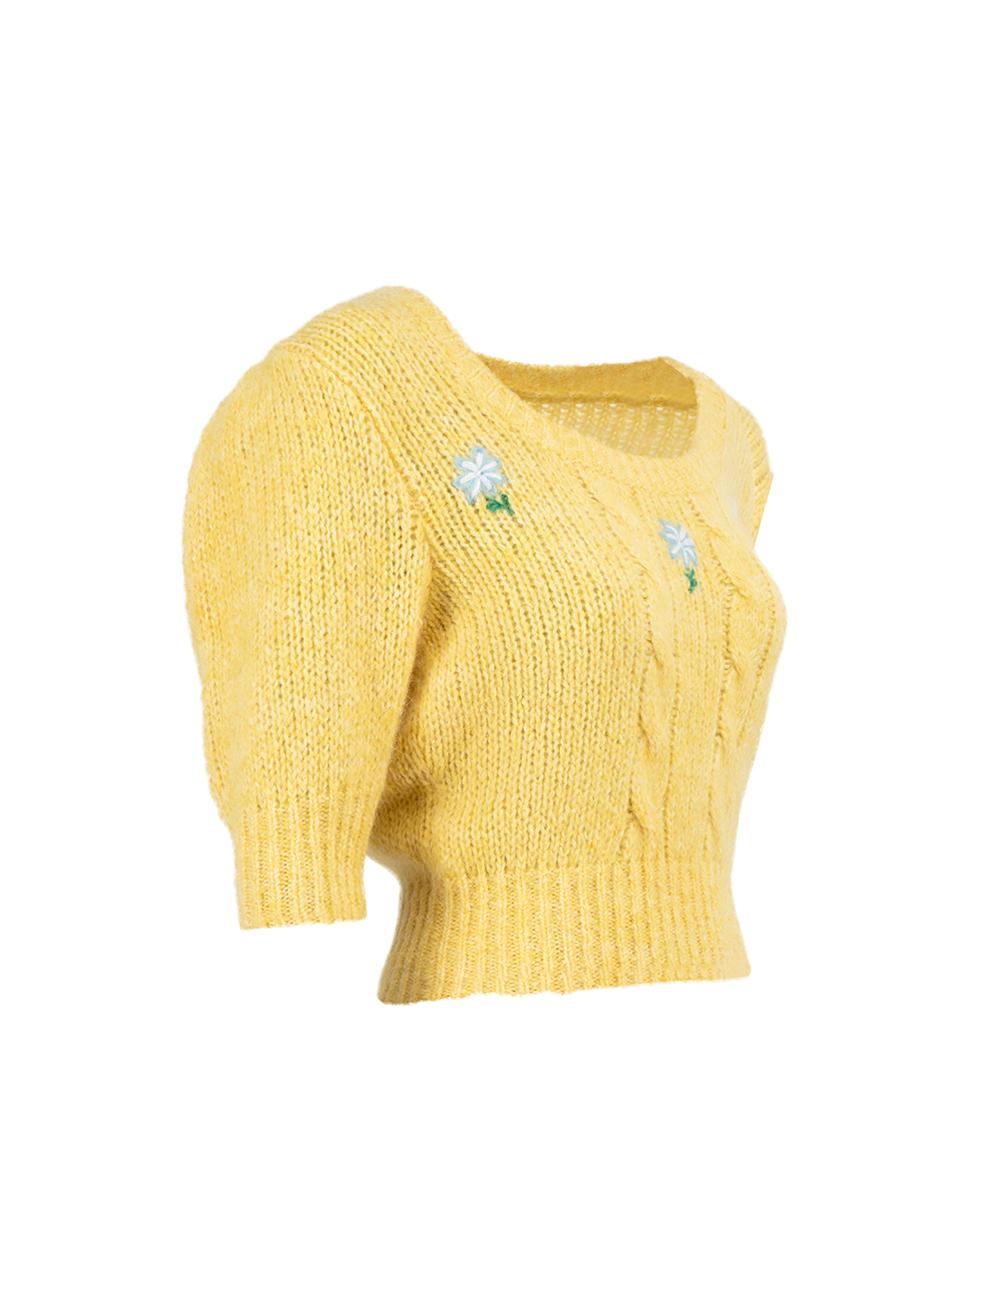 CONDITION is Very good. Hardly any visible wear to knitwear is evident on this used Alessandra Rich designer resale item.

Details
Yellow
Alpaca
Cable knit top
Short sleeves
Round neckline
Floral embroidery
Cropped 

Made in Italy 

Composition
25%